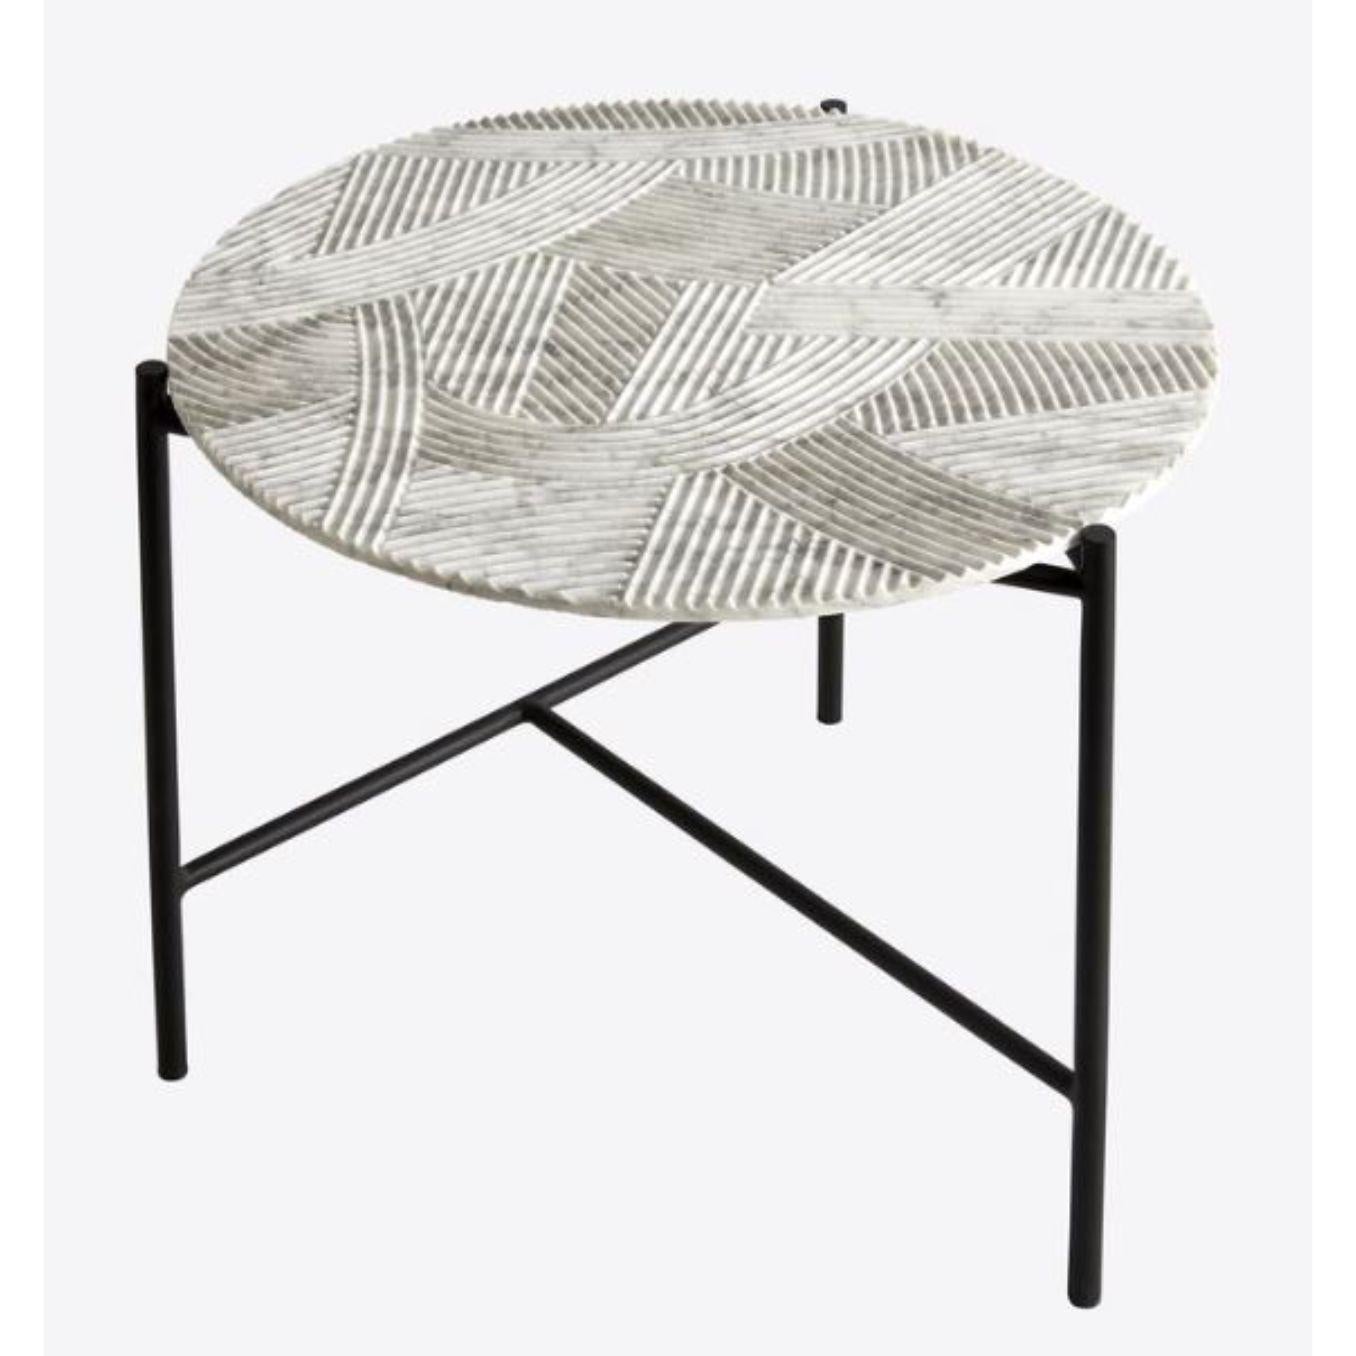 Solco coffee table by Radar.
Design: Bastien Taillard.
Materials: Metal, Carrara marble.
Dimensions: D 60 x W 60 x H 43 cm


Elegant, timeless, understated. The RADAR collection allows you to take a welcome break from the teeming world of